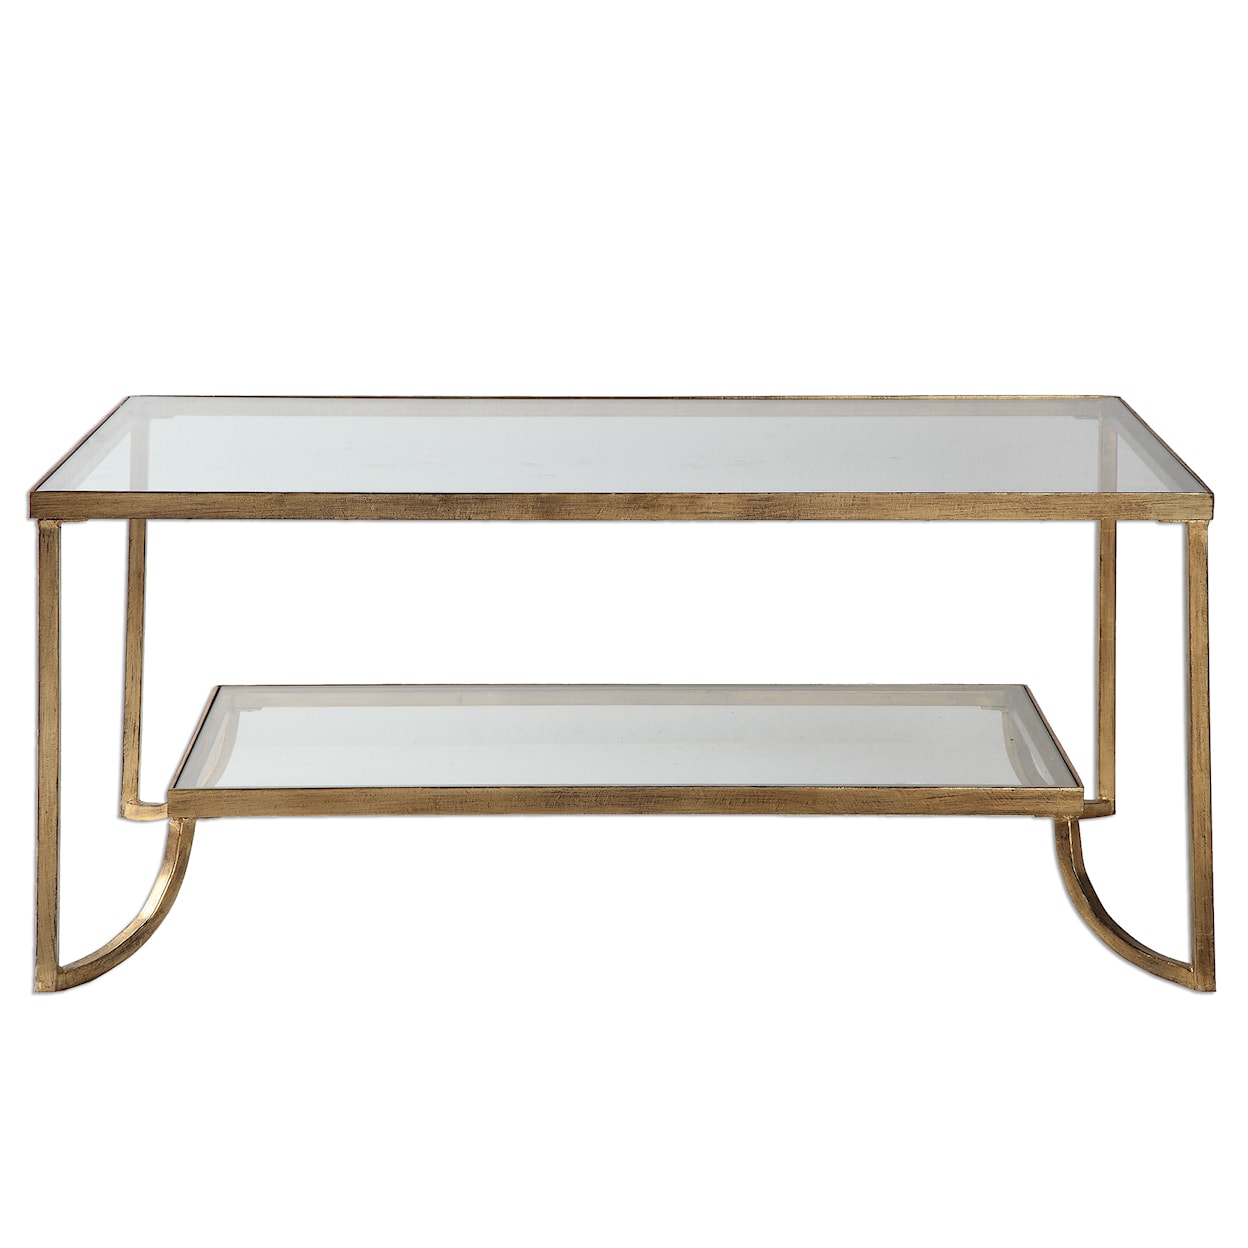 Uttermost Accent Furniture - Occasional Tables Katina Gold Leaf Coffee Table